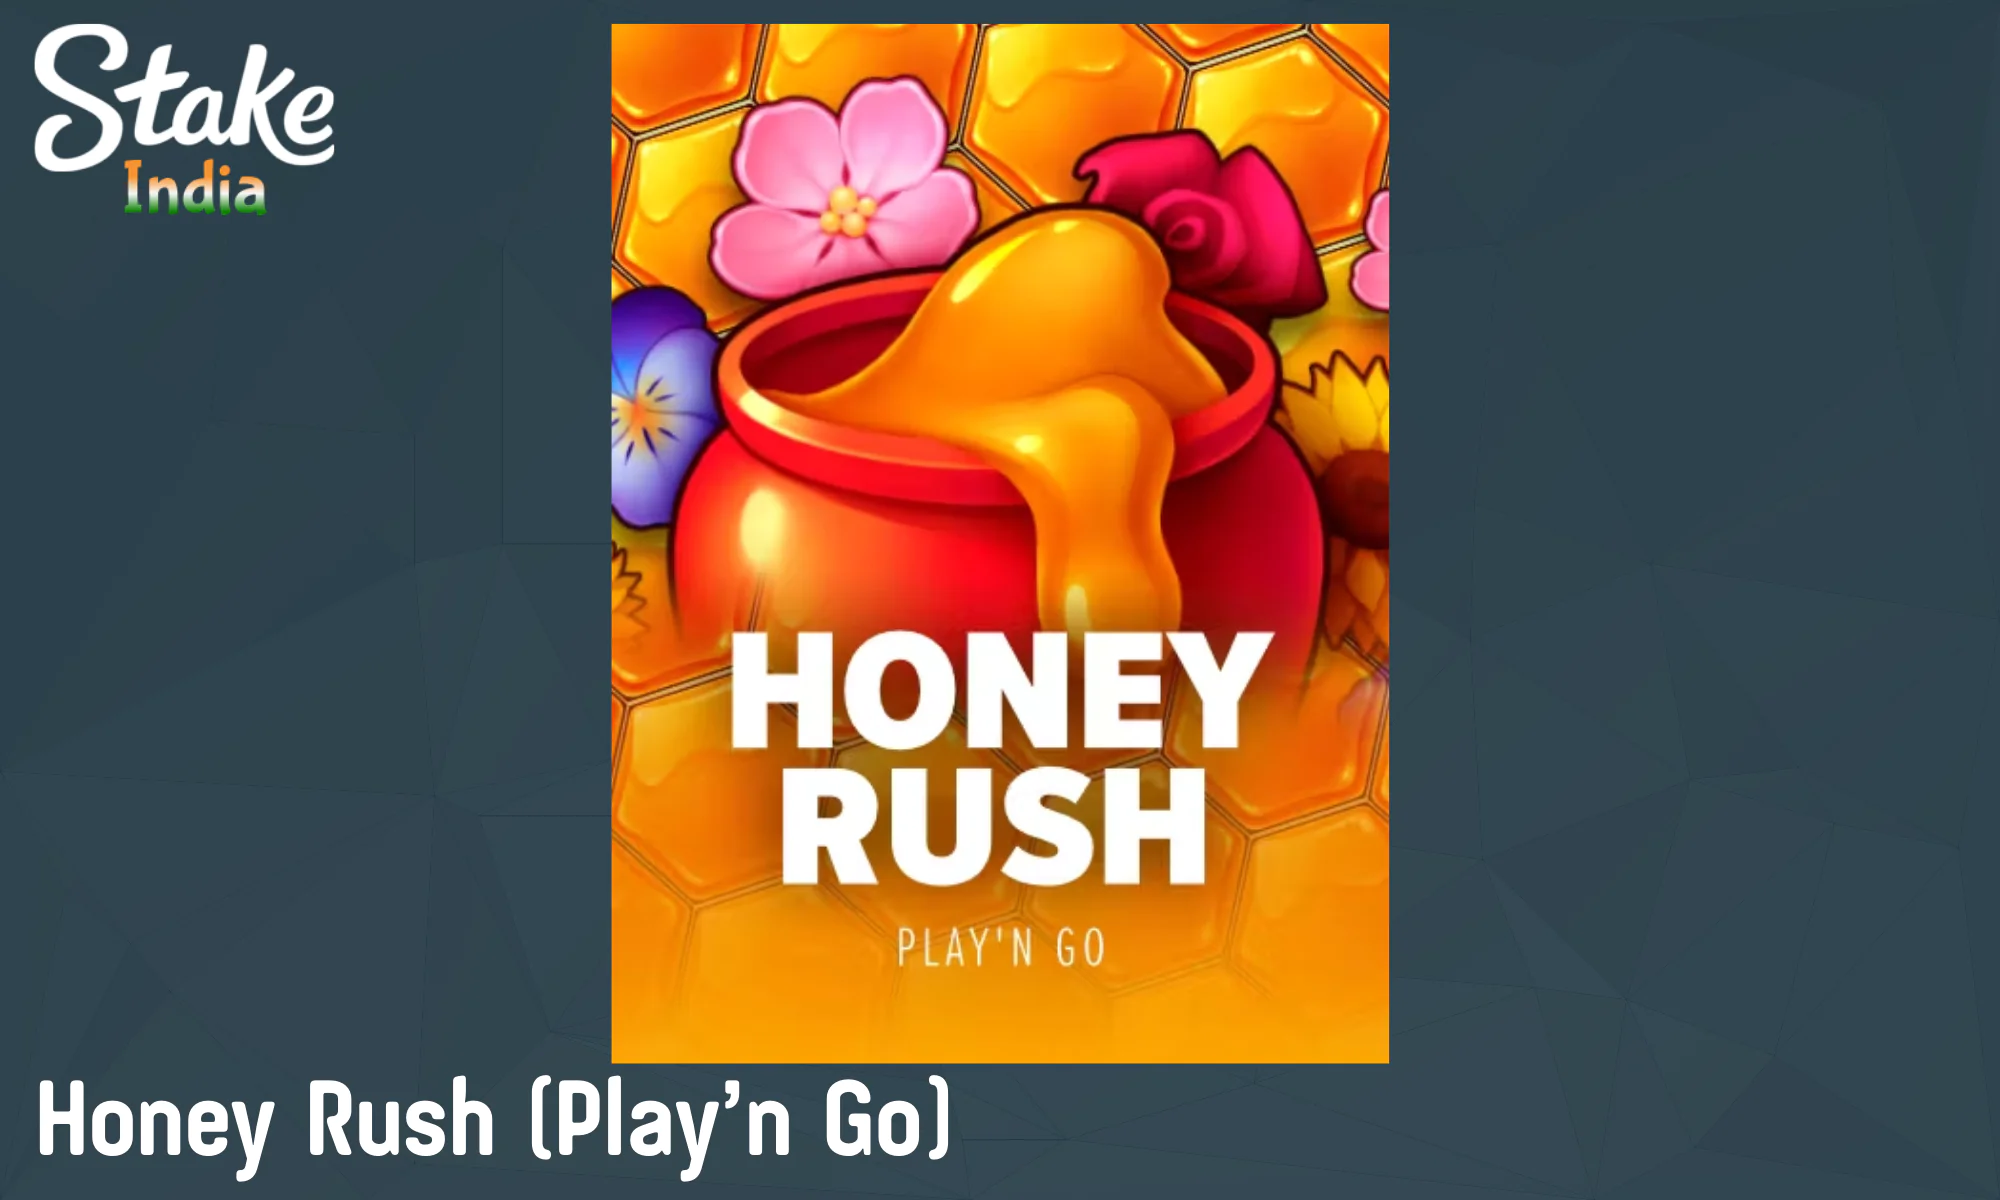 Honey Rush designed for fans of slots with cute graphics is available at Stake